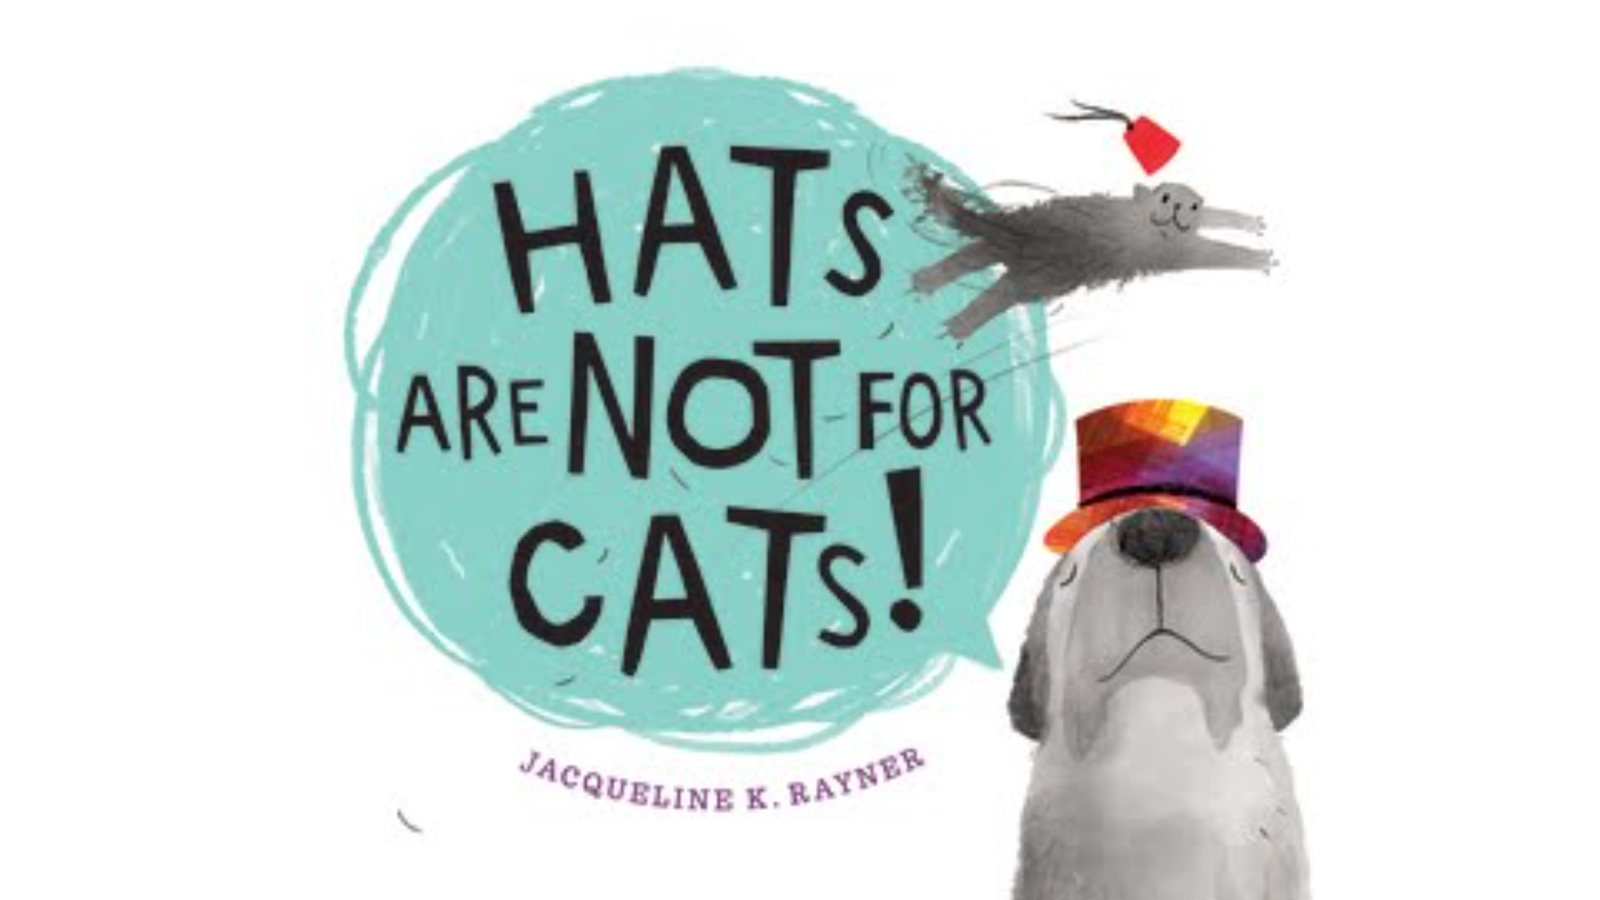 Children's book cover, dog and cat with hats, whimsical.